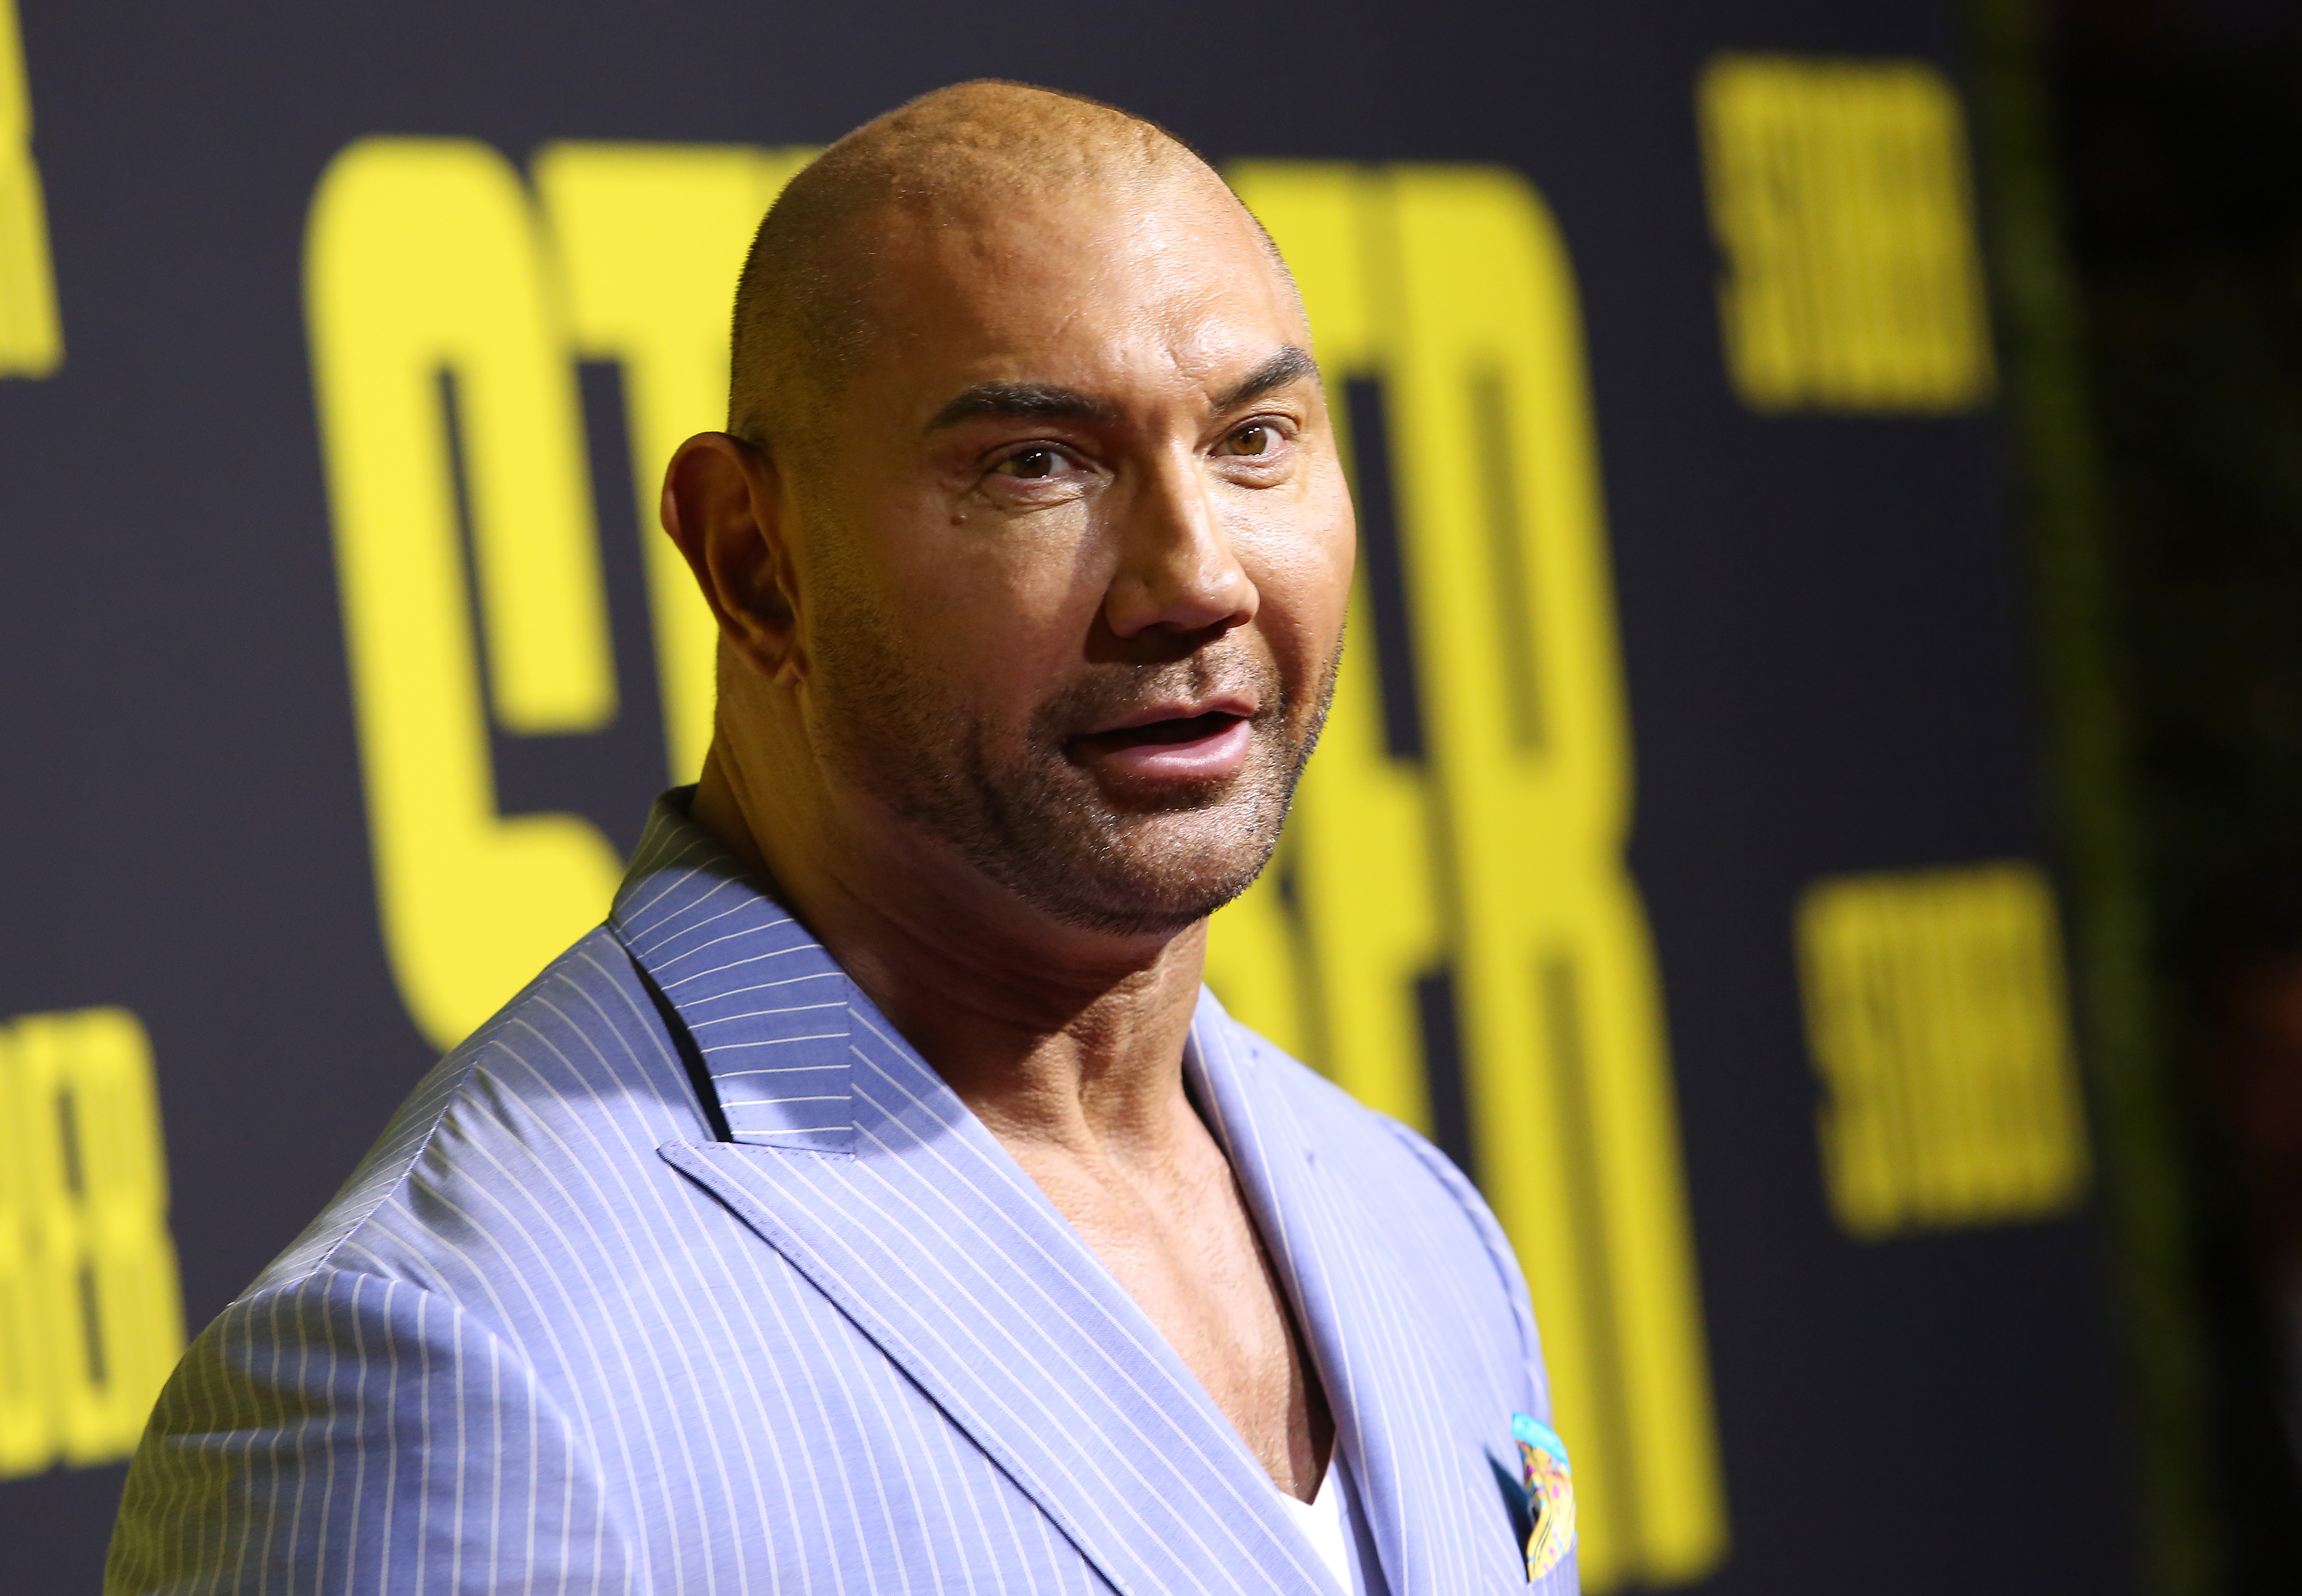 Dave Bautista has 'relief' 'Guardians of the Galaxy' role is over